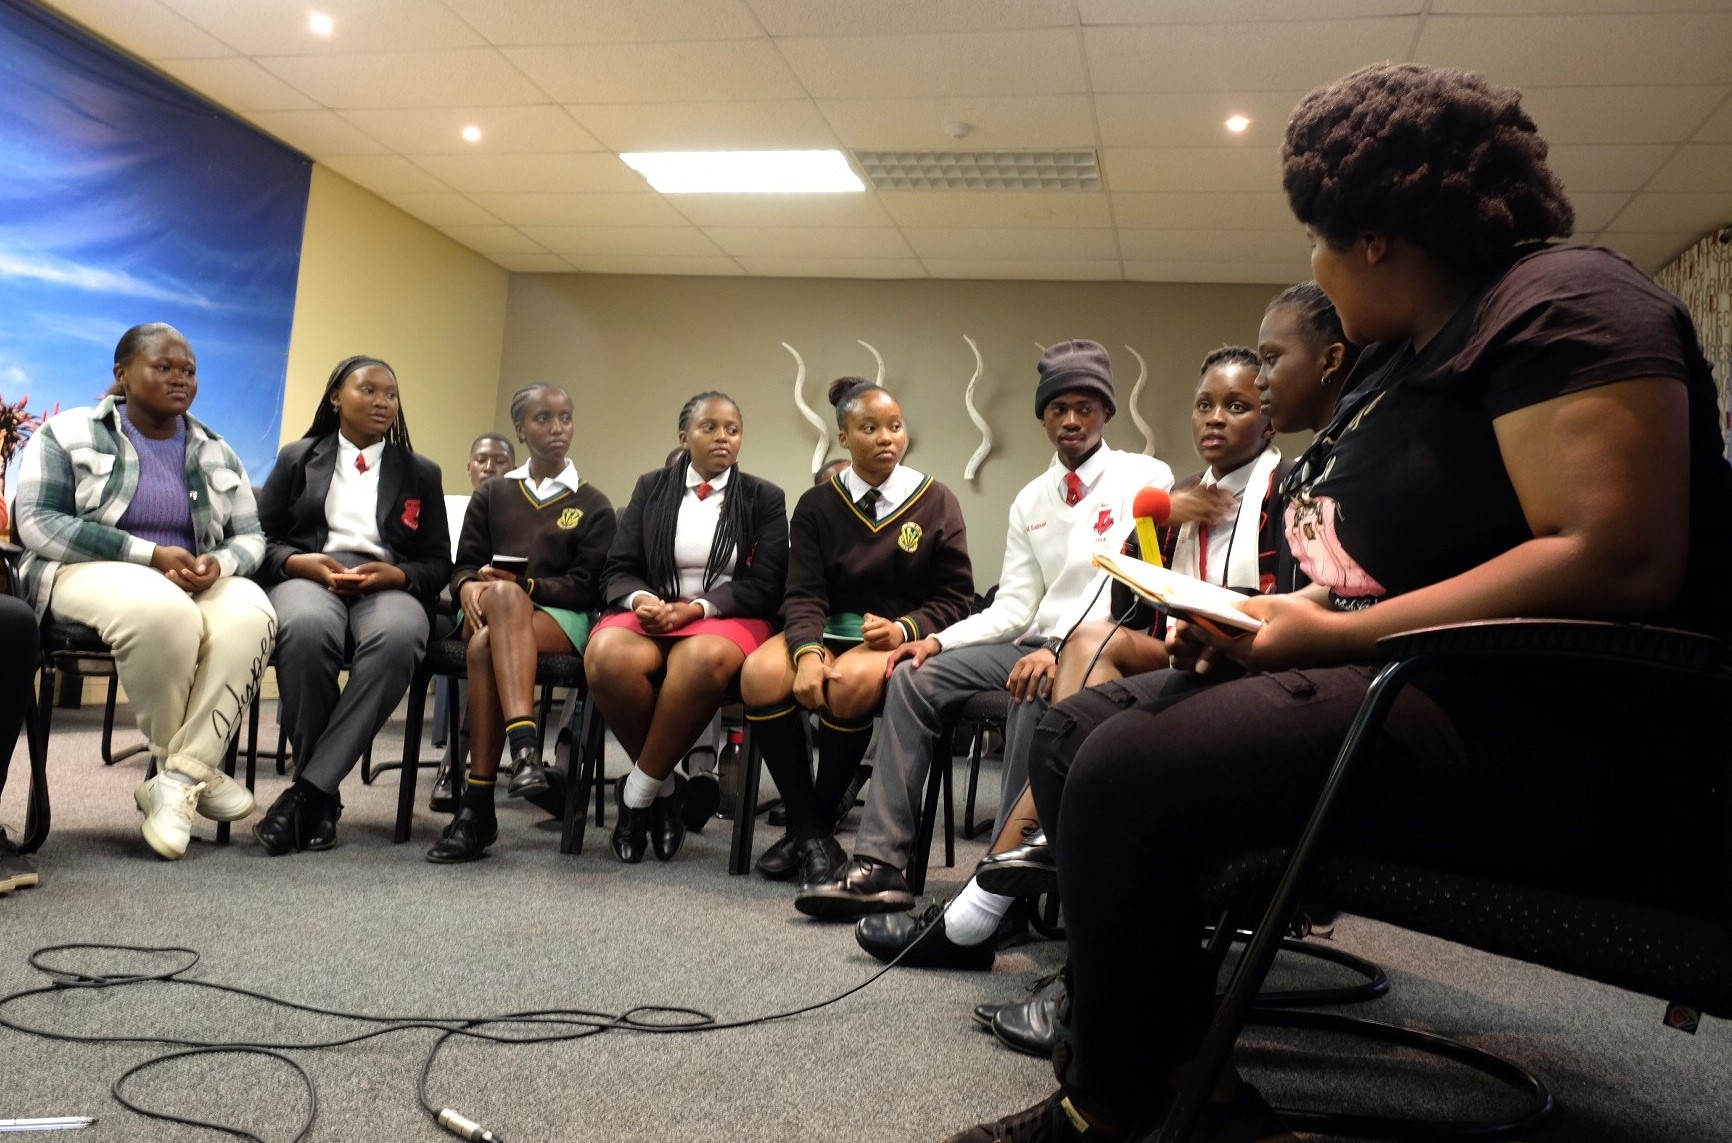 A Ntsika High School learner expresses herself during the podcast on 27 February in the Africa Media Matrix at Rhodes University. Photo: Rod Amner